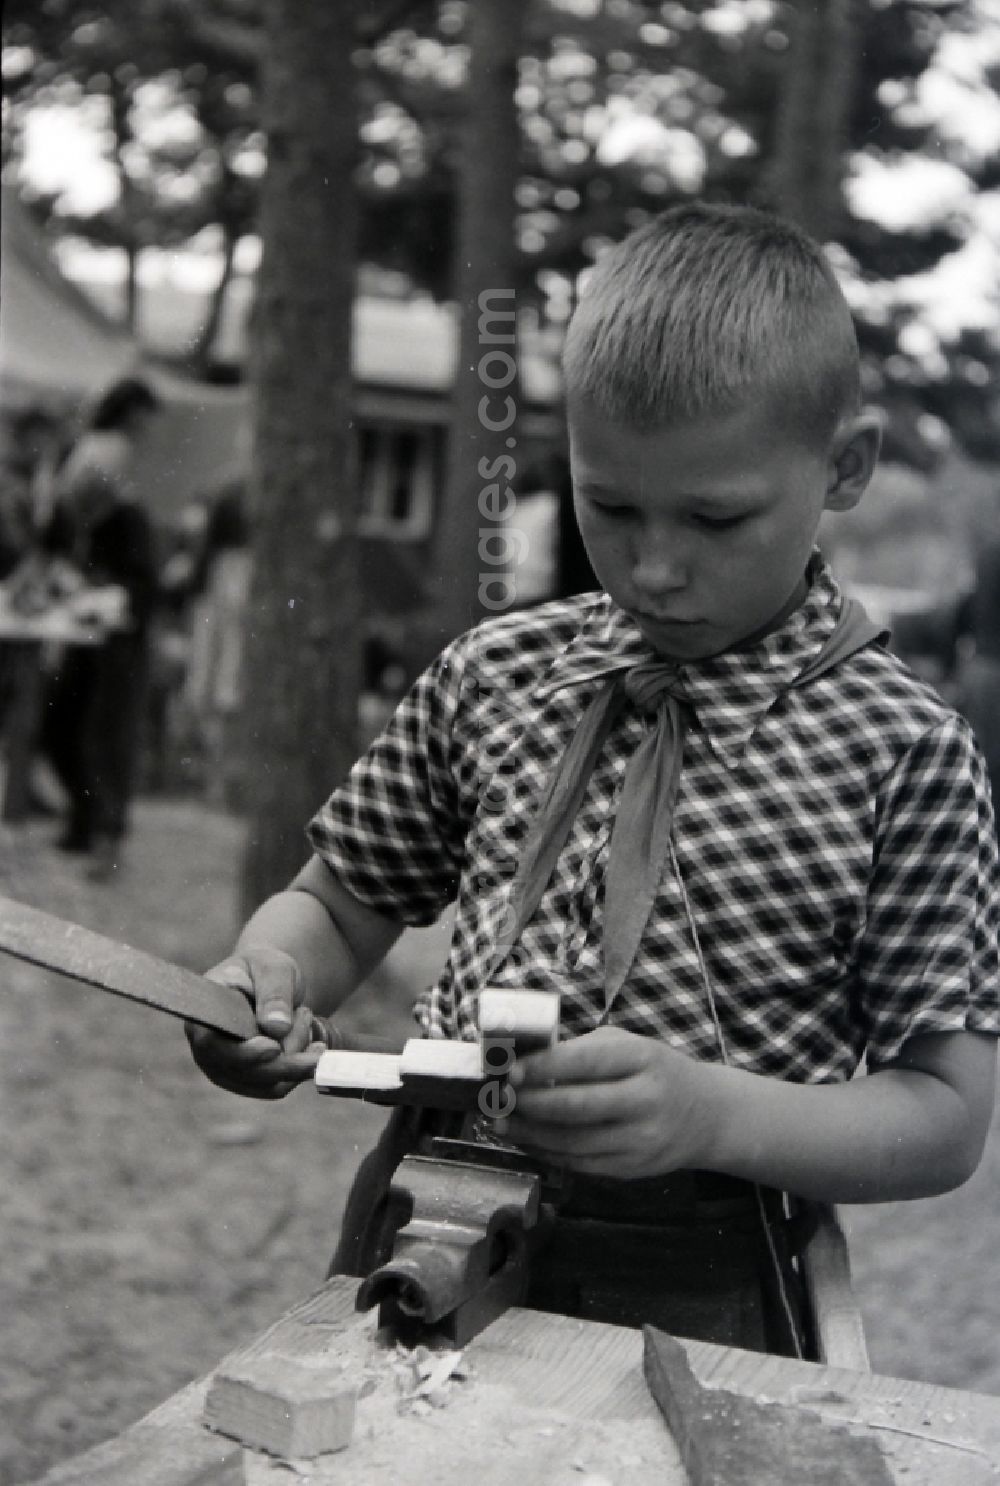 GDR image archive: Prerow - Game with homemade wooden weapons by students and youths in the summer camp Kim Ir Sen of the pioneer organization Ernst Thaelmann in Prerow in the state Mecklenburg-Western Pomerania on the territory of the former GDR, German Democratic Republic